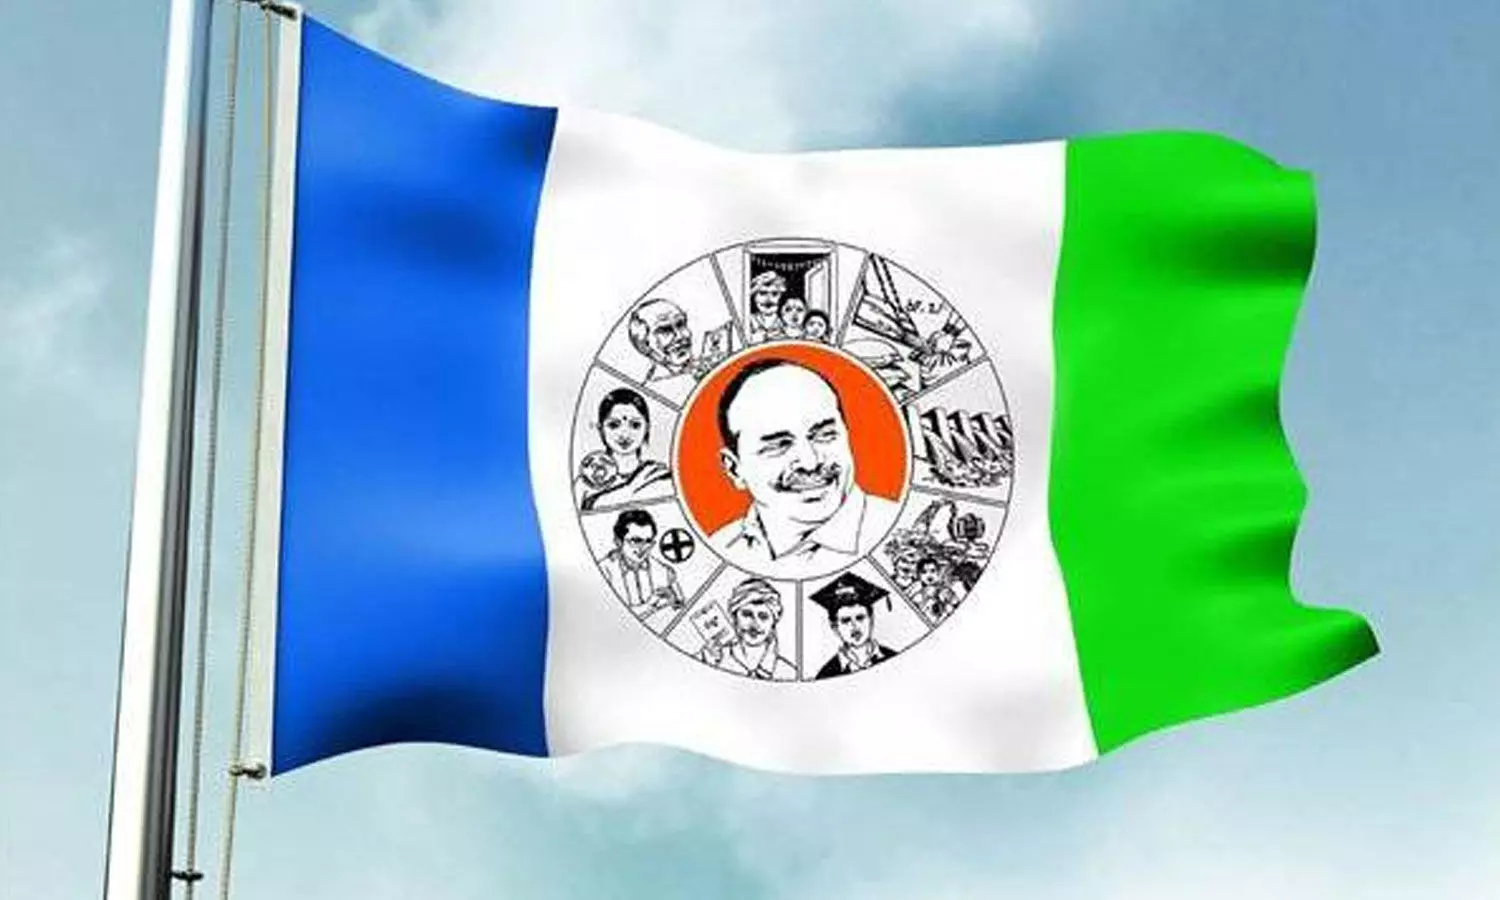 This Young YSRCP Leader To Contest as MP in 2019?